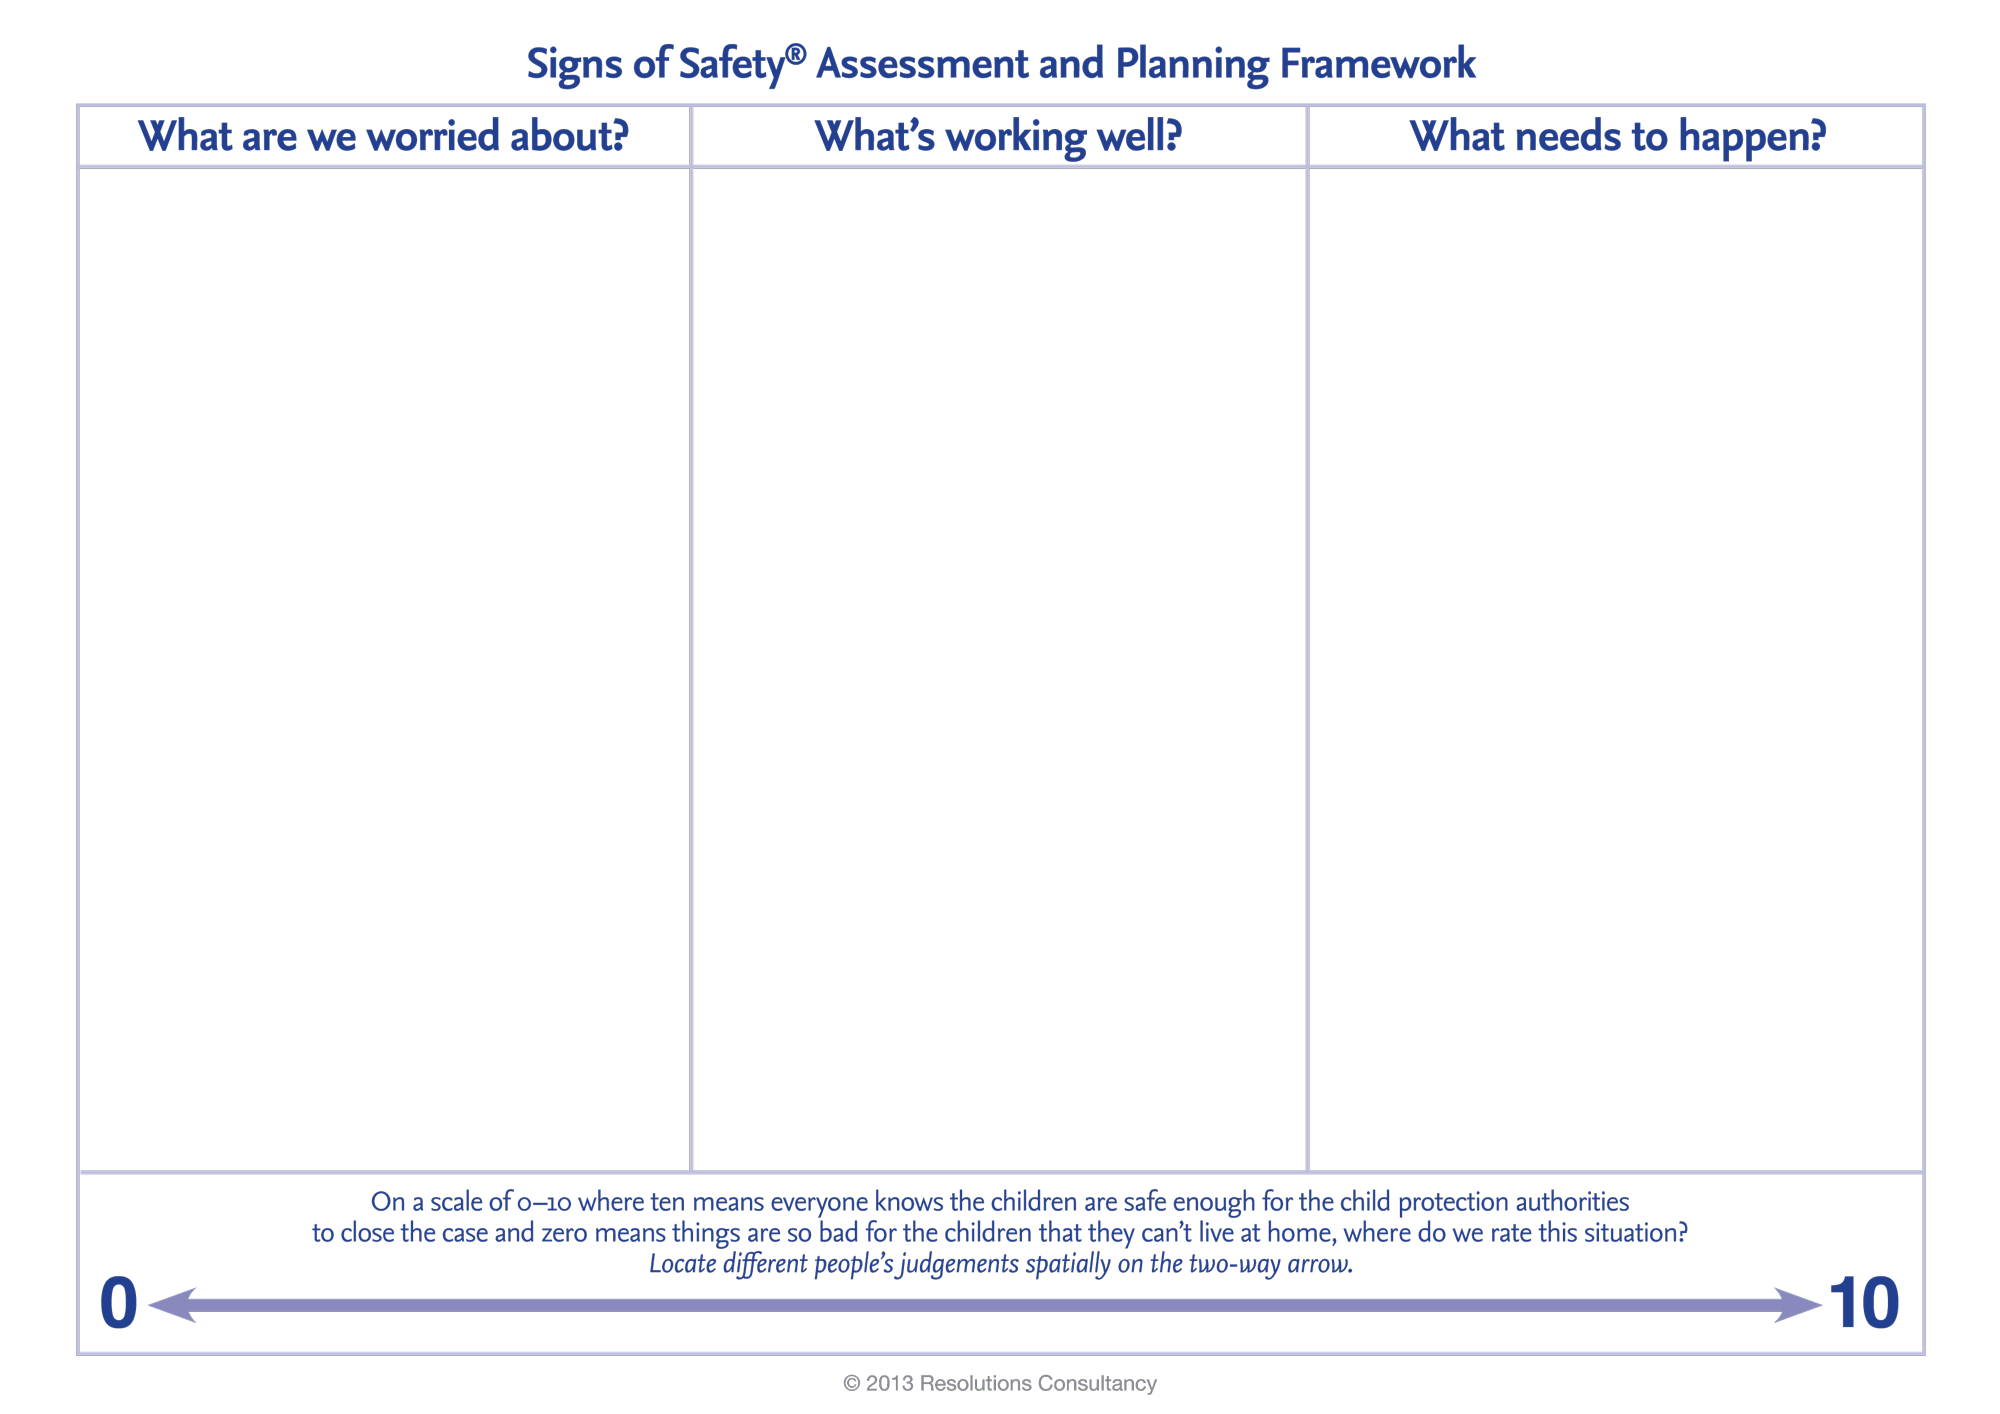 One-page Signs of Safety assessment protocol.